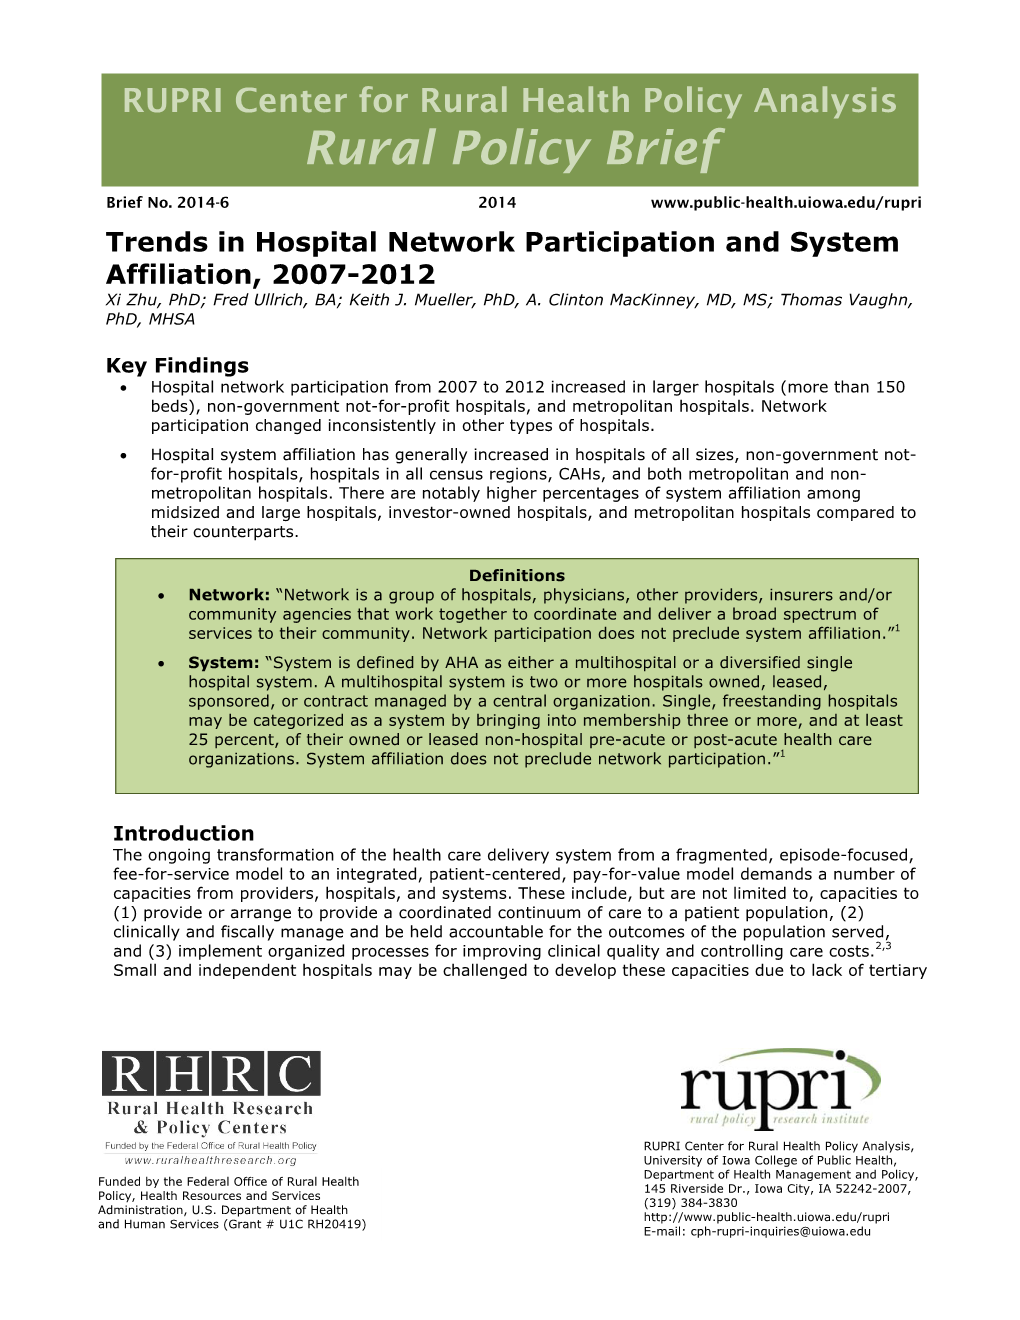 Trends in Hospital Network Participation and System Affiliation, 2007-2012 Xi Zhu, Phd; Fred Ullrich, BA; Keith J